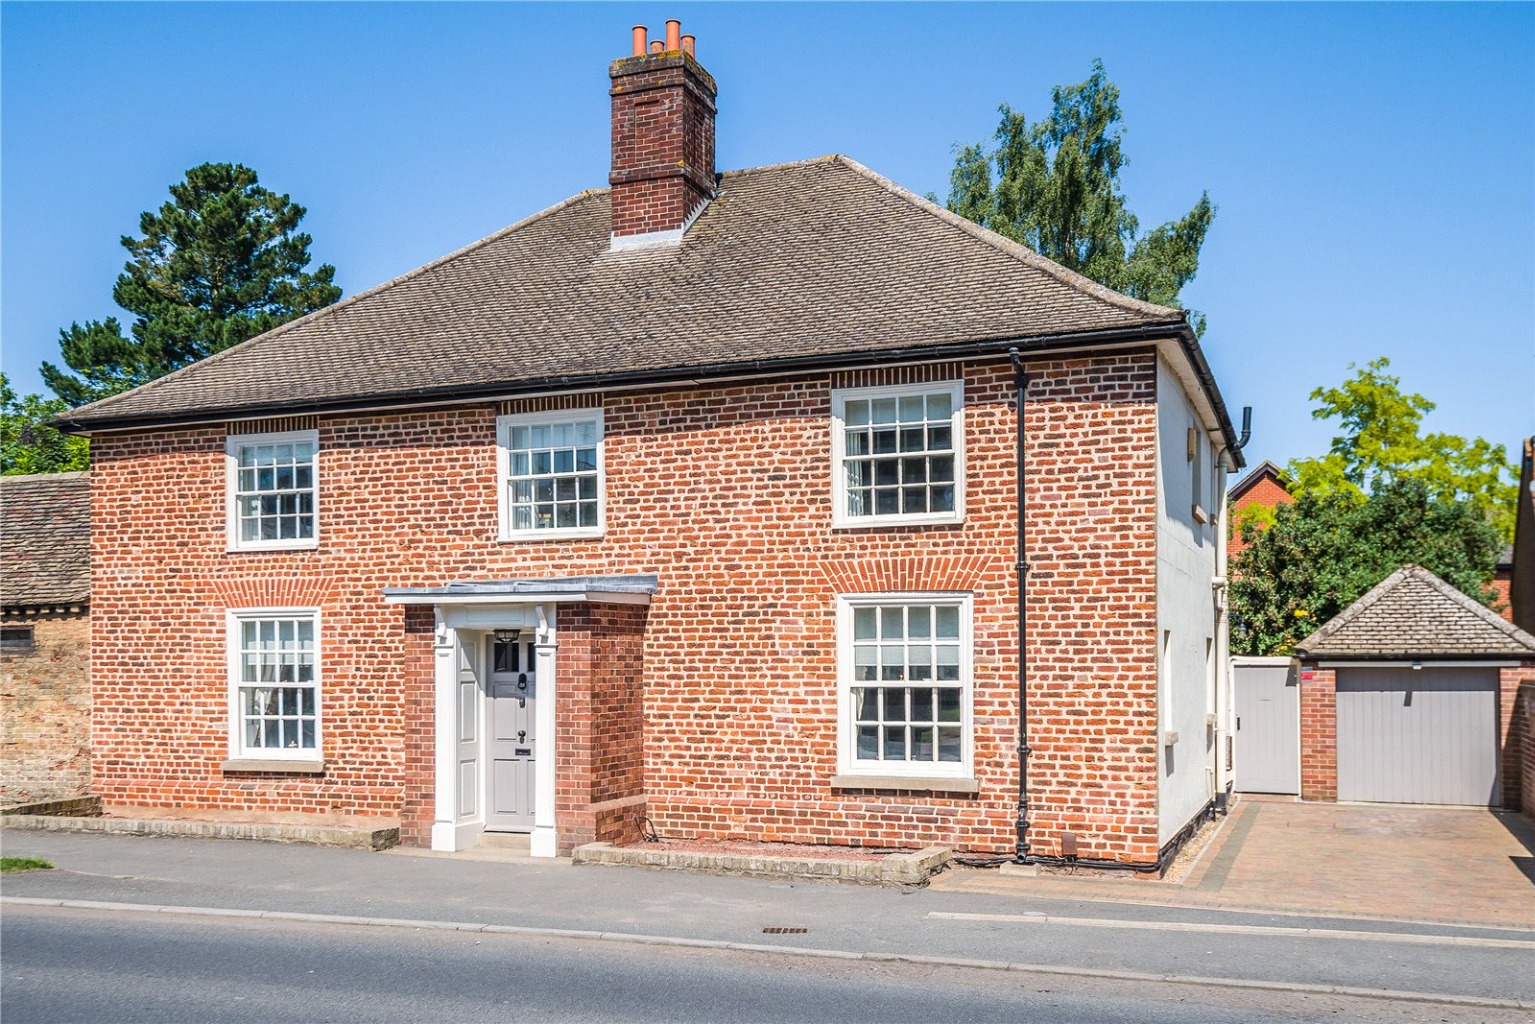 4 bed detached house for sale in Main Street, Huntingdon  - Property Image 1